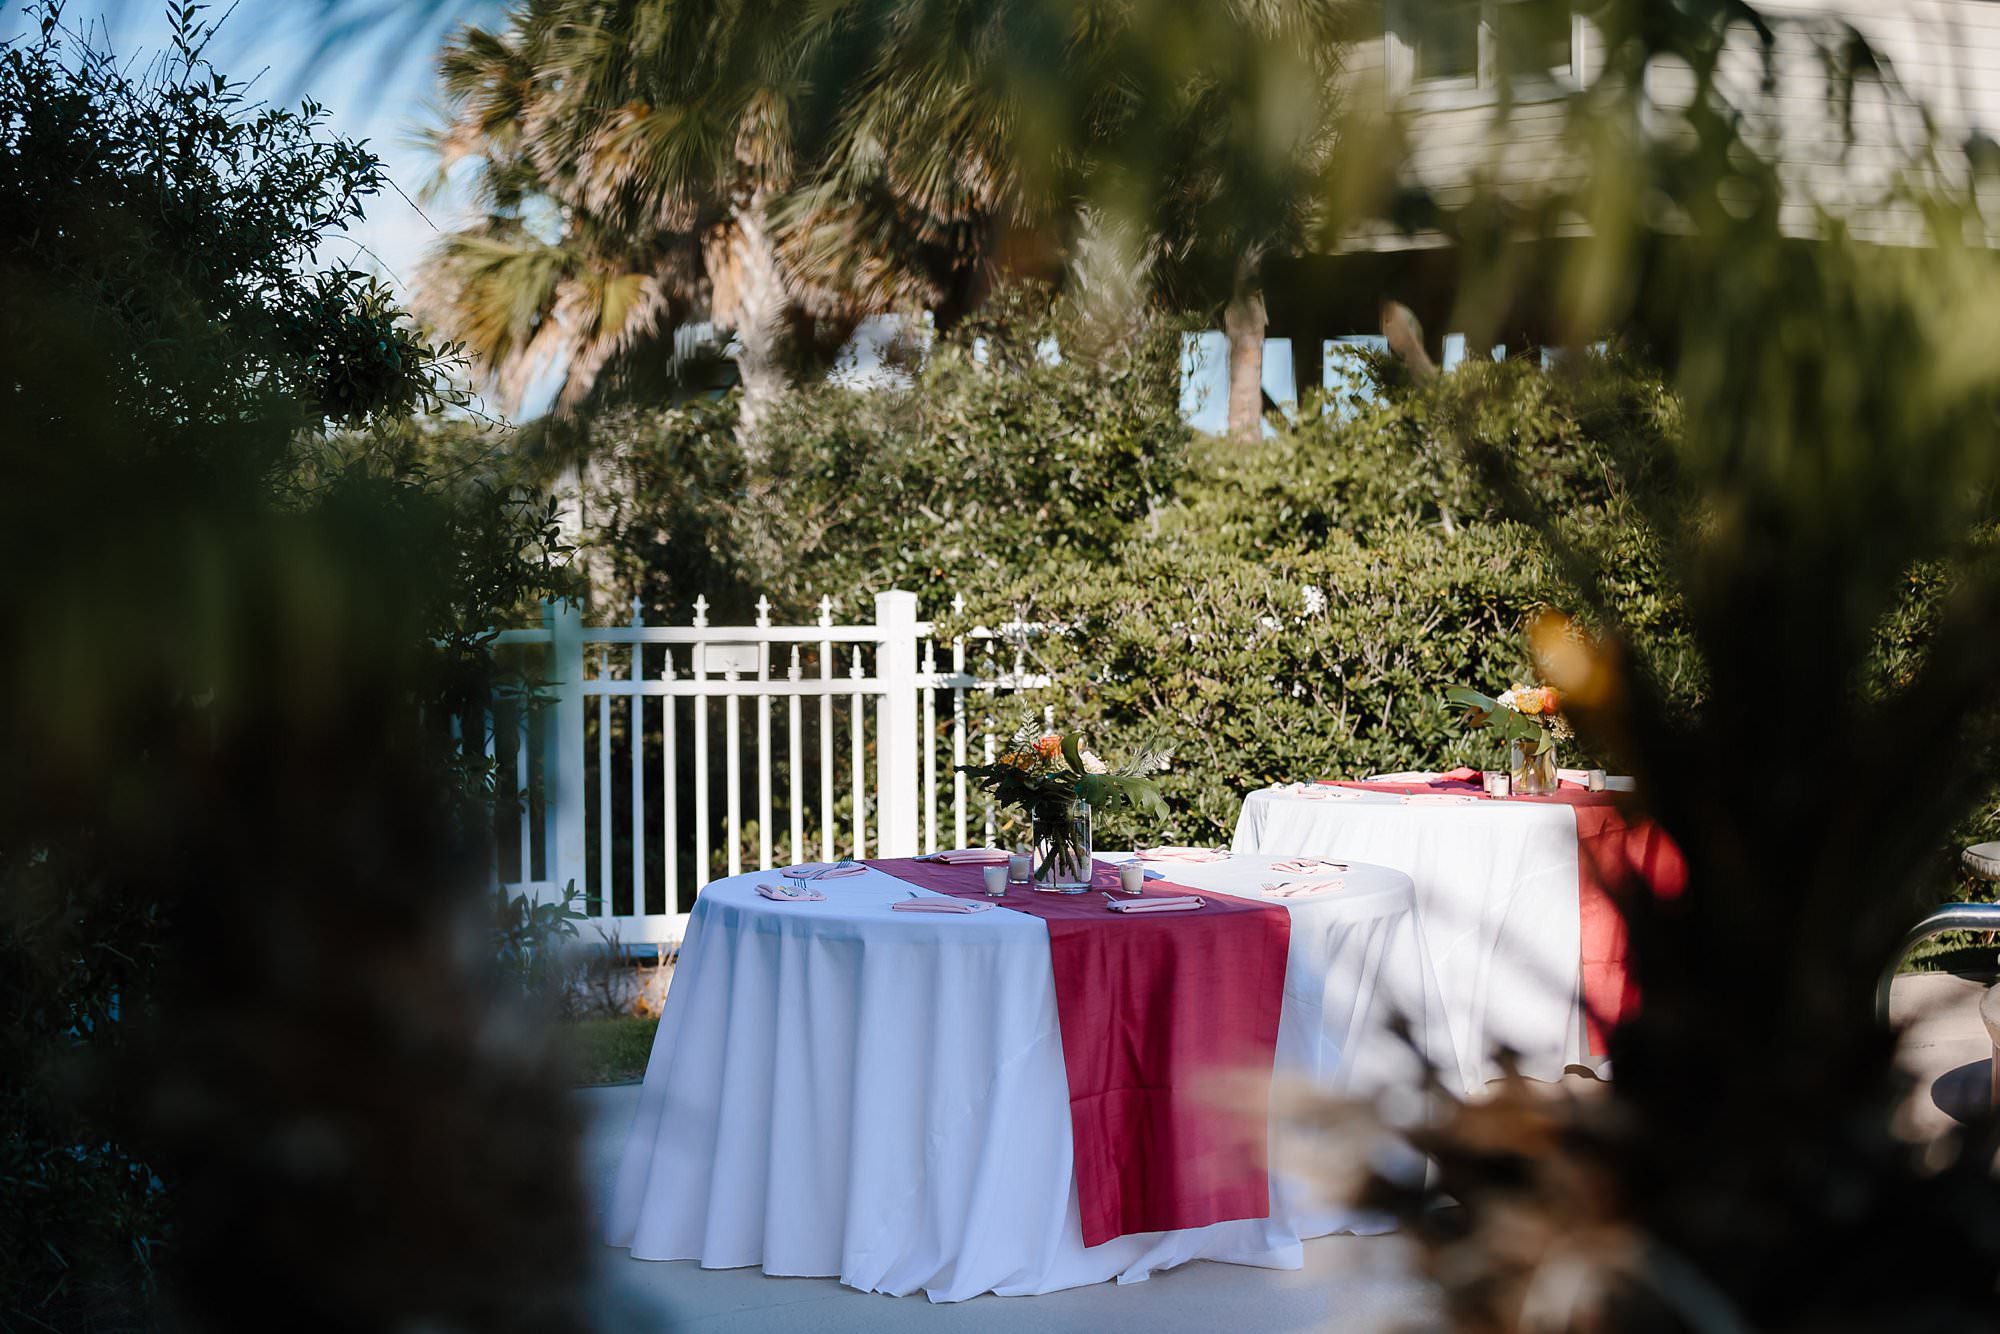 Outdoor round tables set for wedding reception with tropical flowers and bright coral runners